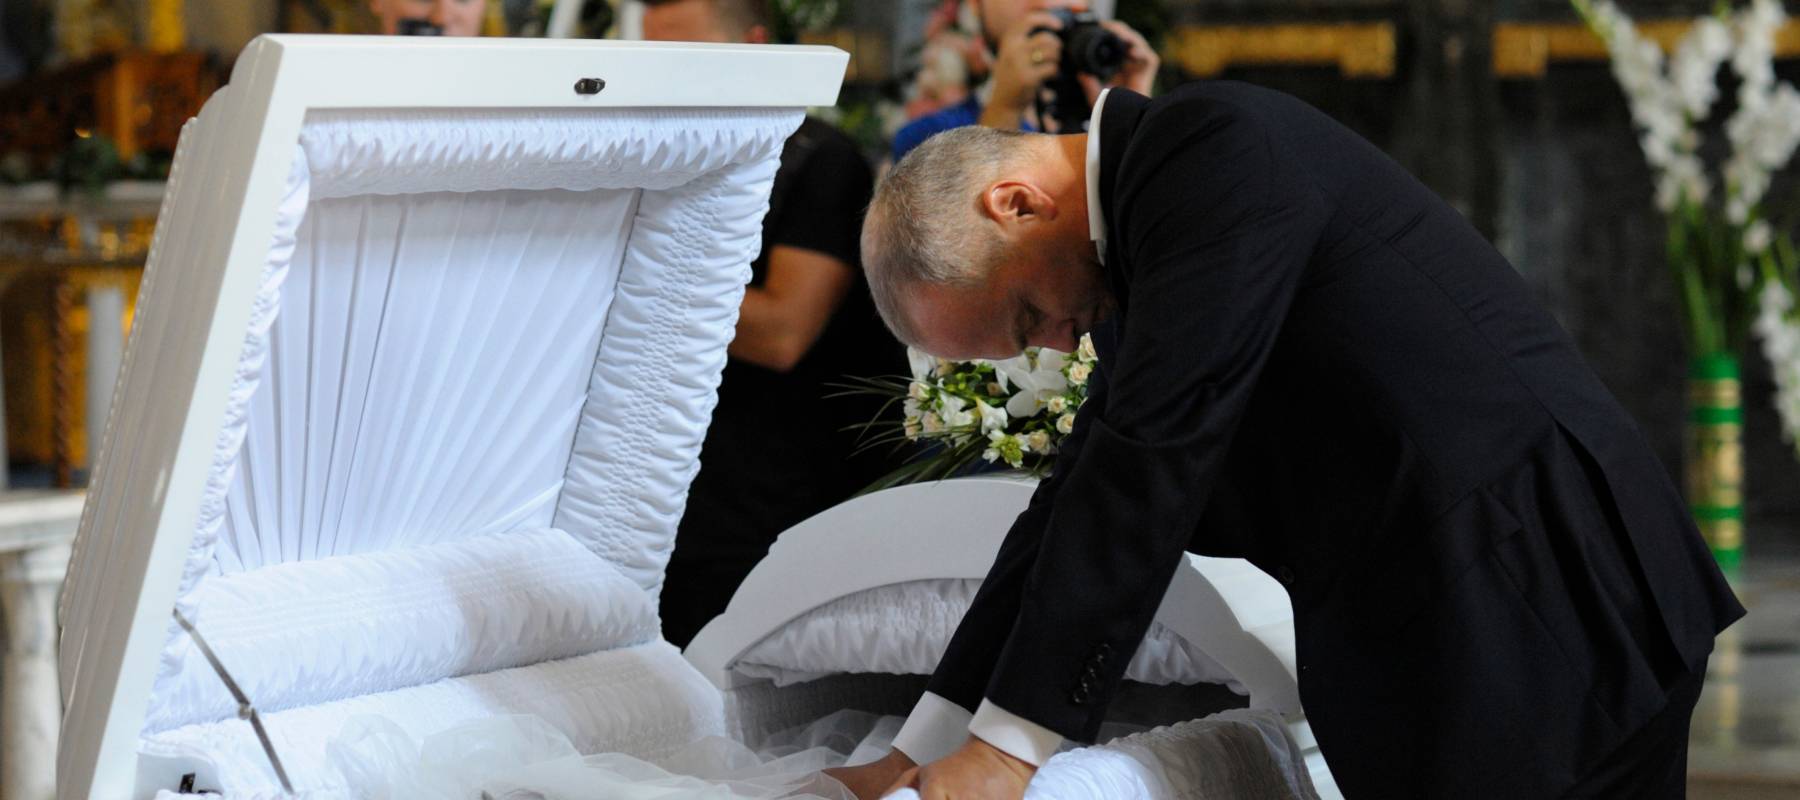 Man stands mourning over a white casket